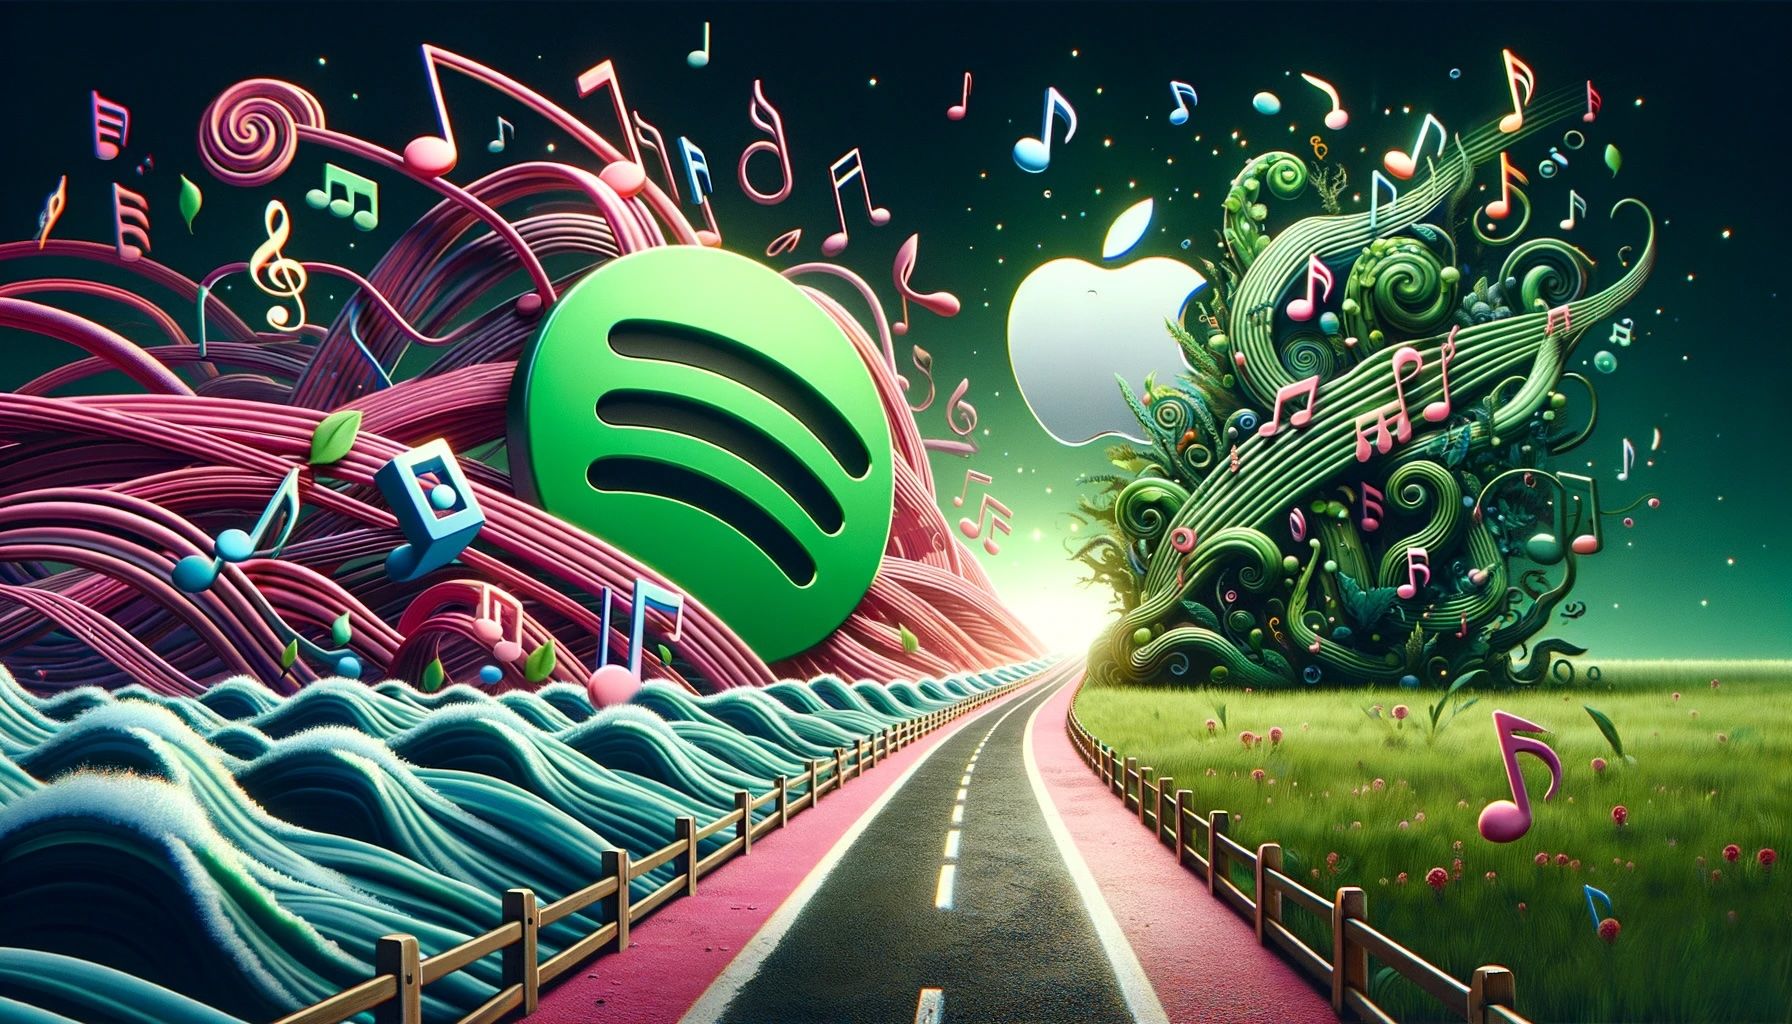 Road from a Spotify-themed side to an Apple Music-infused landscape, symbolizing a switch between services.